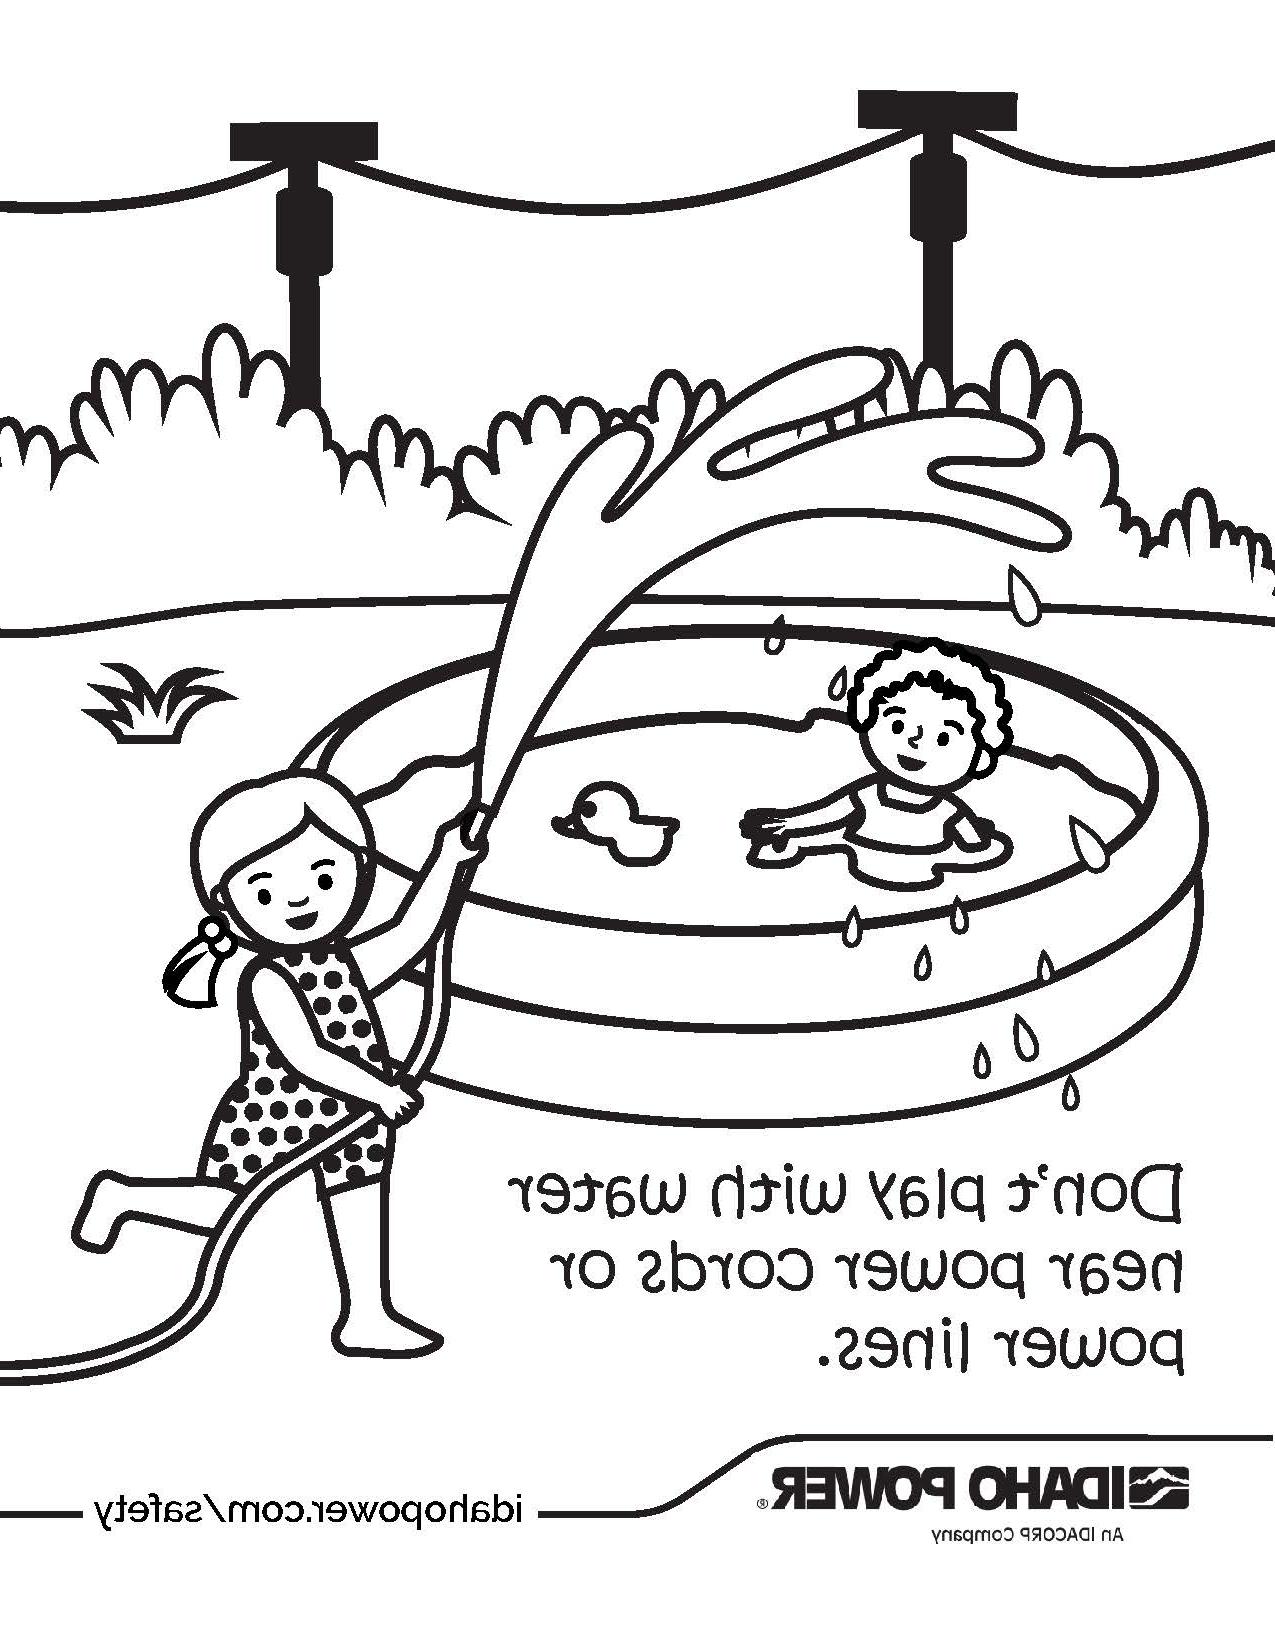 Coloring page of kids playing outside with water that says, Don't play with water near power cords or power lines.